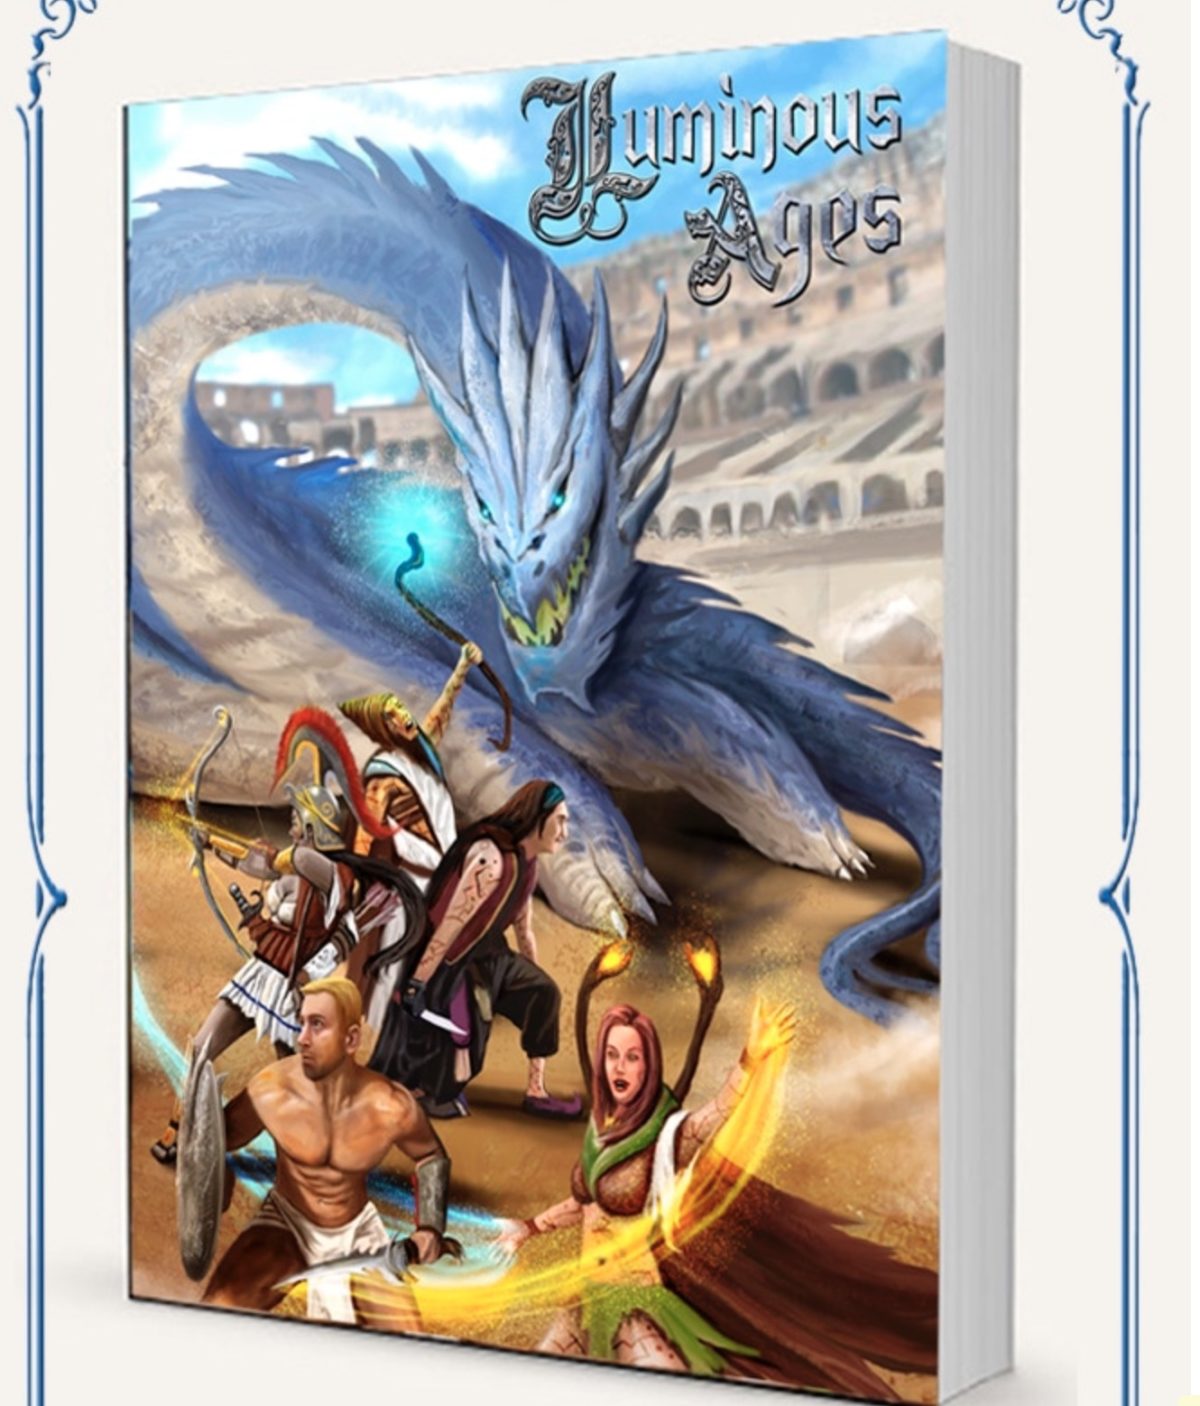 Luminous Ages Volume 1: Dragons, Monsters & Surreal Fantasy  Superbly painted epic adventure with wizards & creatures from many myths & cultures fighting for nature. Discover a new form of magic.  .